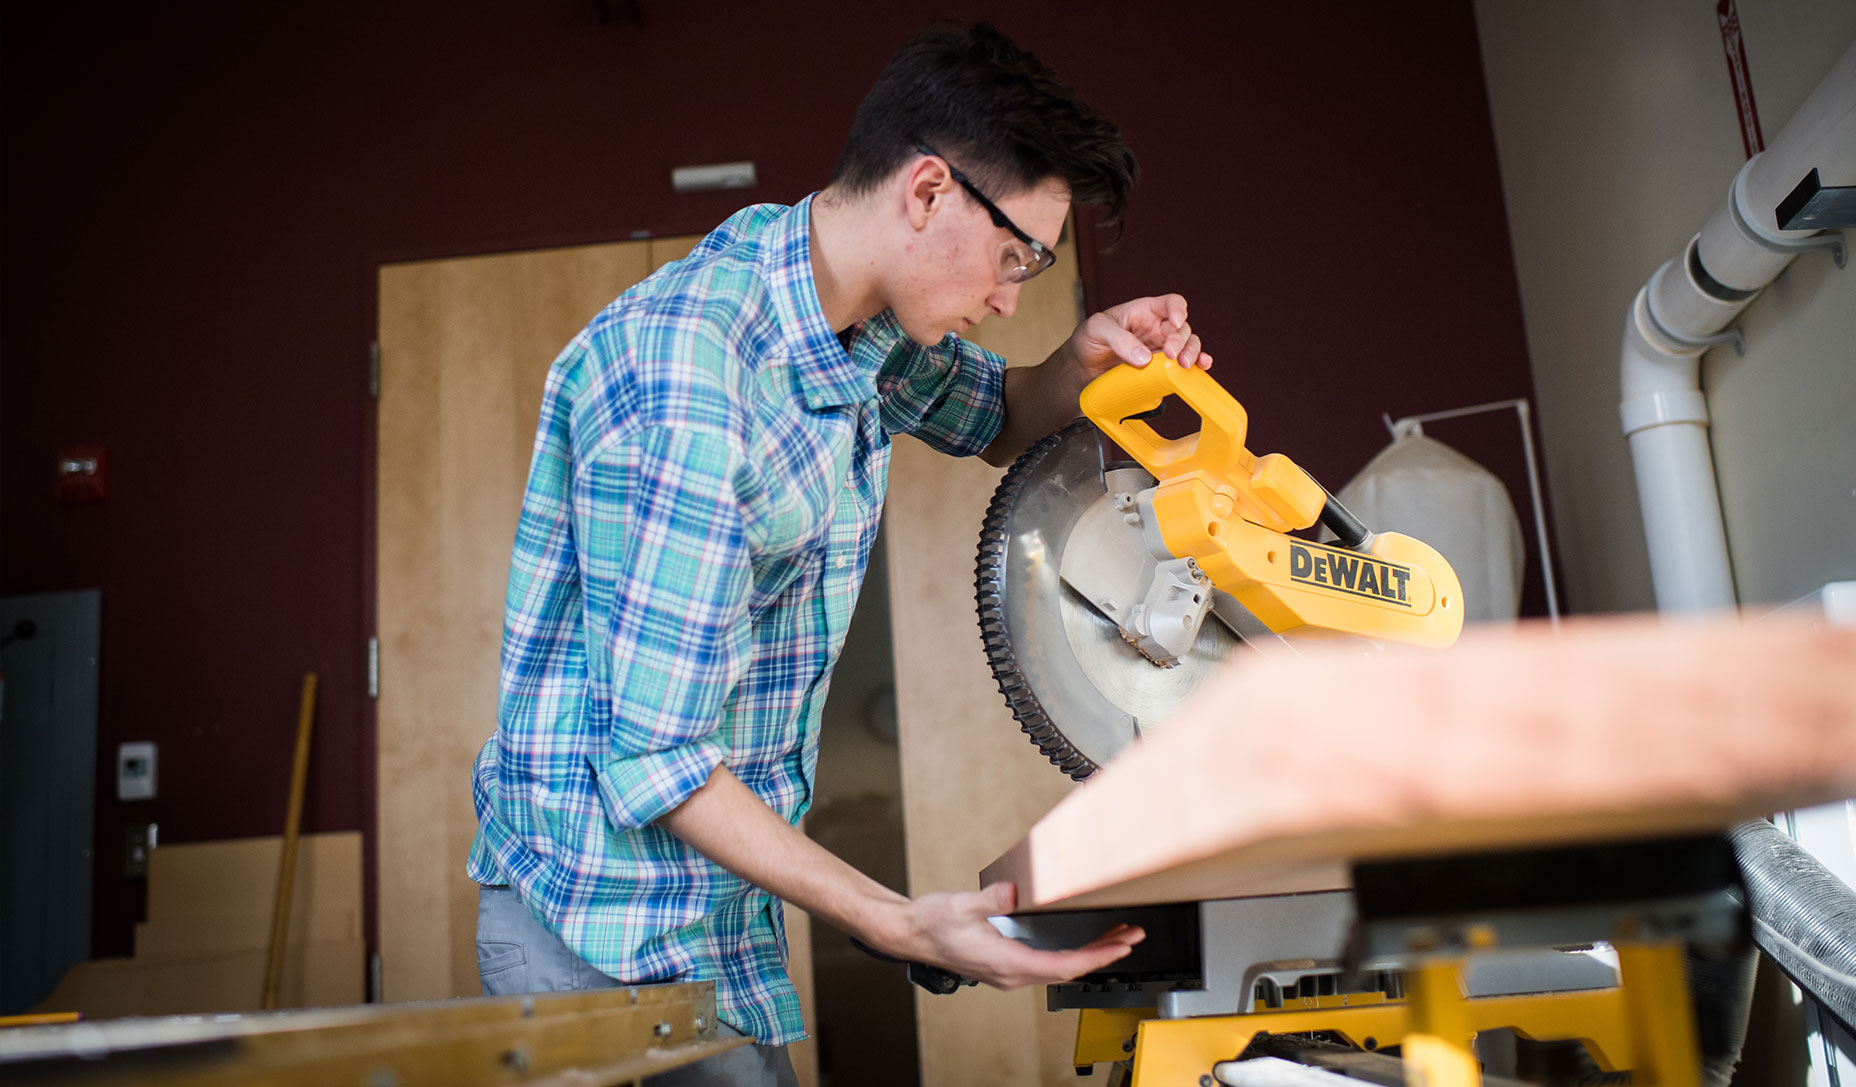 Woodworker Justin Fiaschetti uses a saw in the Fiaschetti Woodworking workshop.